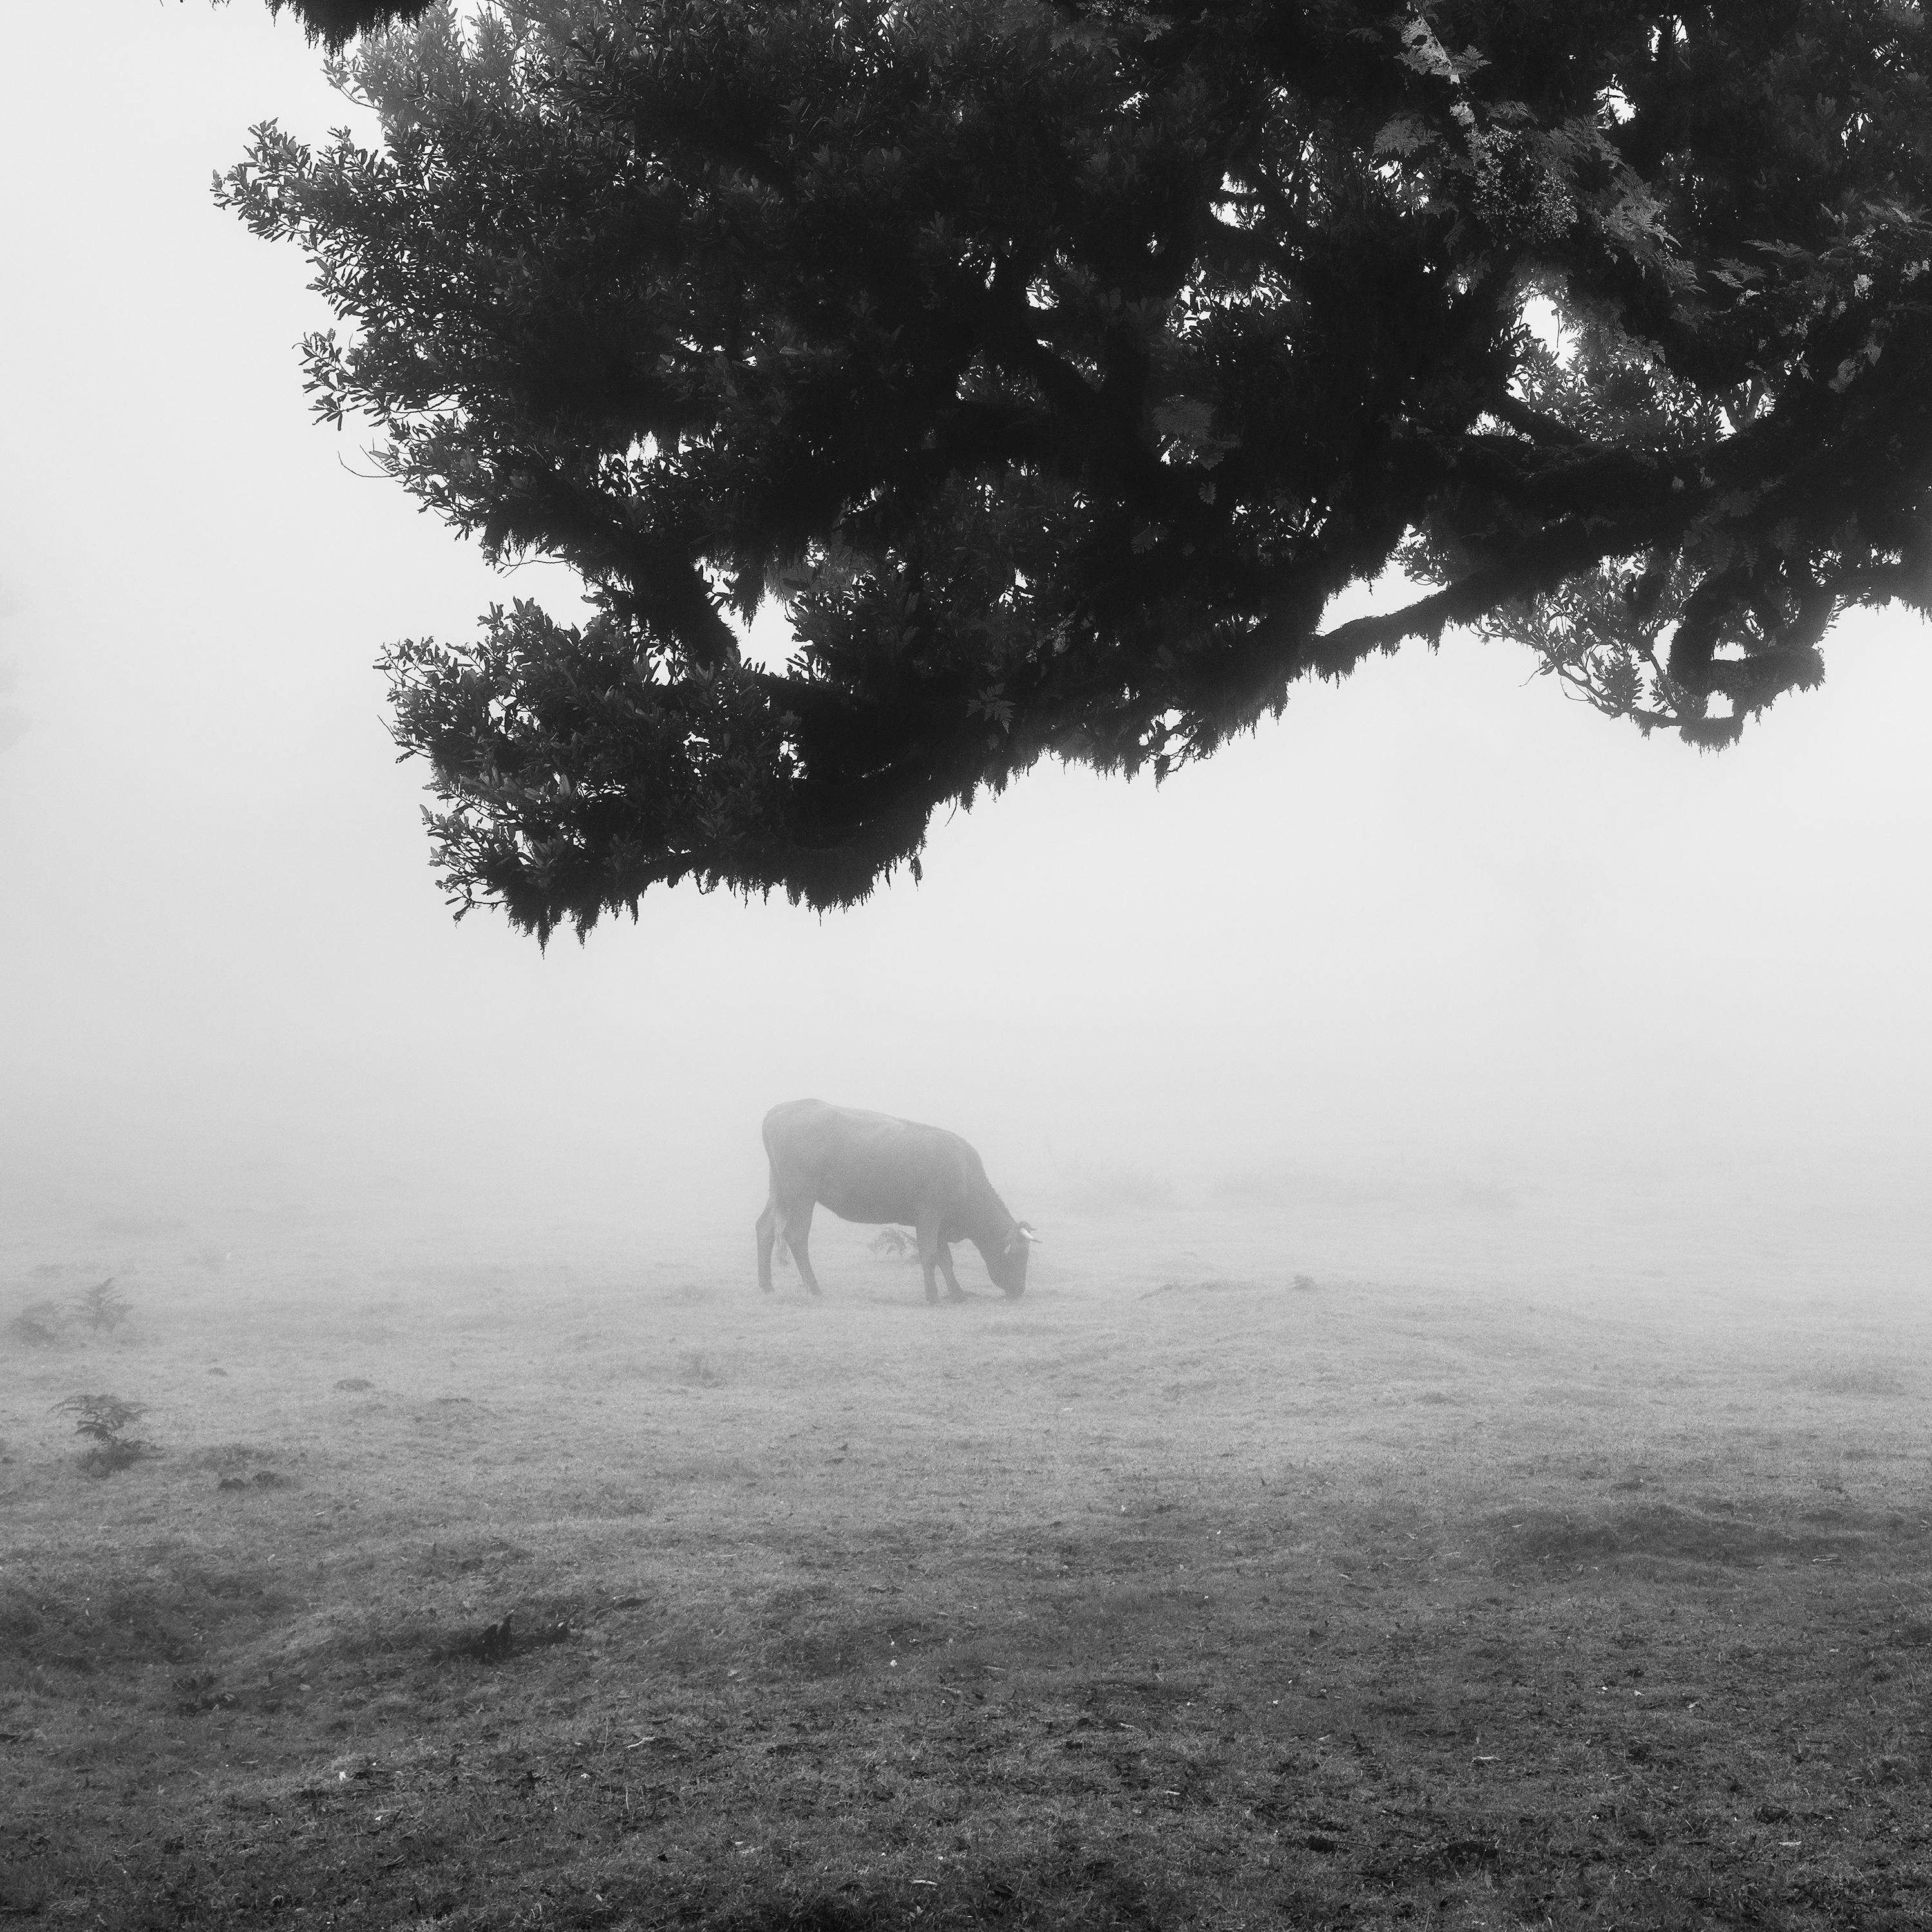 Cows on the foggy Pasture, Portugal, black and white photography, art landscape For Sale 6